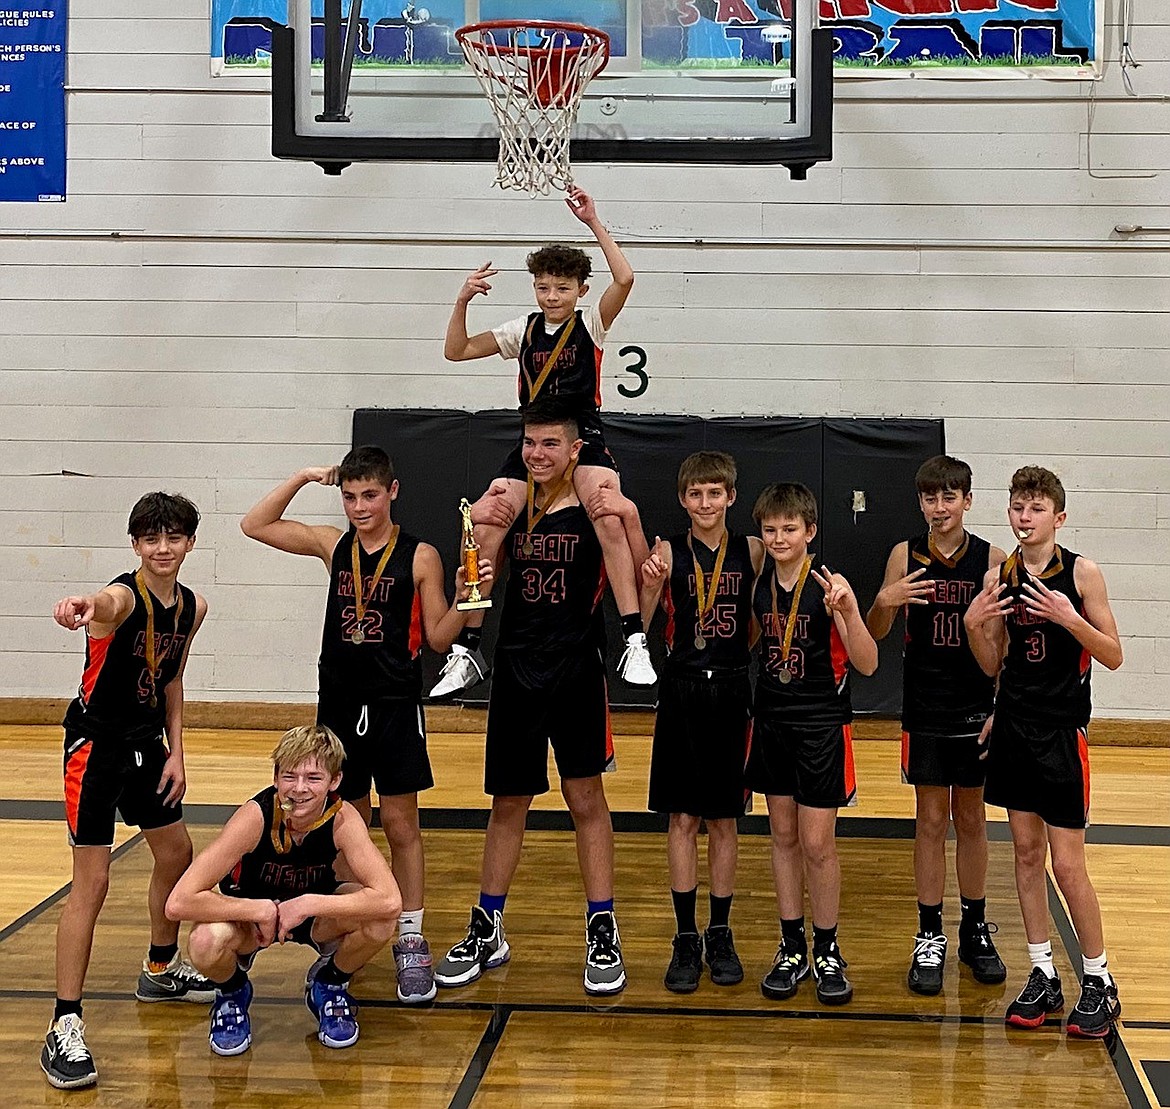 Courtesy photo
Attached is a picture of the Coeur d'Alene Heat seventh grade AAU boys basketball team, which won the River City Basketball Tournament held Nov. 11-12 in Post Falls. From left are Taytem Frazier, Landon Leveque, Quinn Murrell, Ty Ball, Tavion Norwood (on shoulders), Noah Perkins, John Groat, Cole Clyne and Nick Smith. Not pictured is Carson Munday.